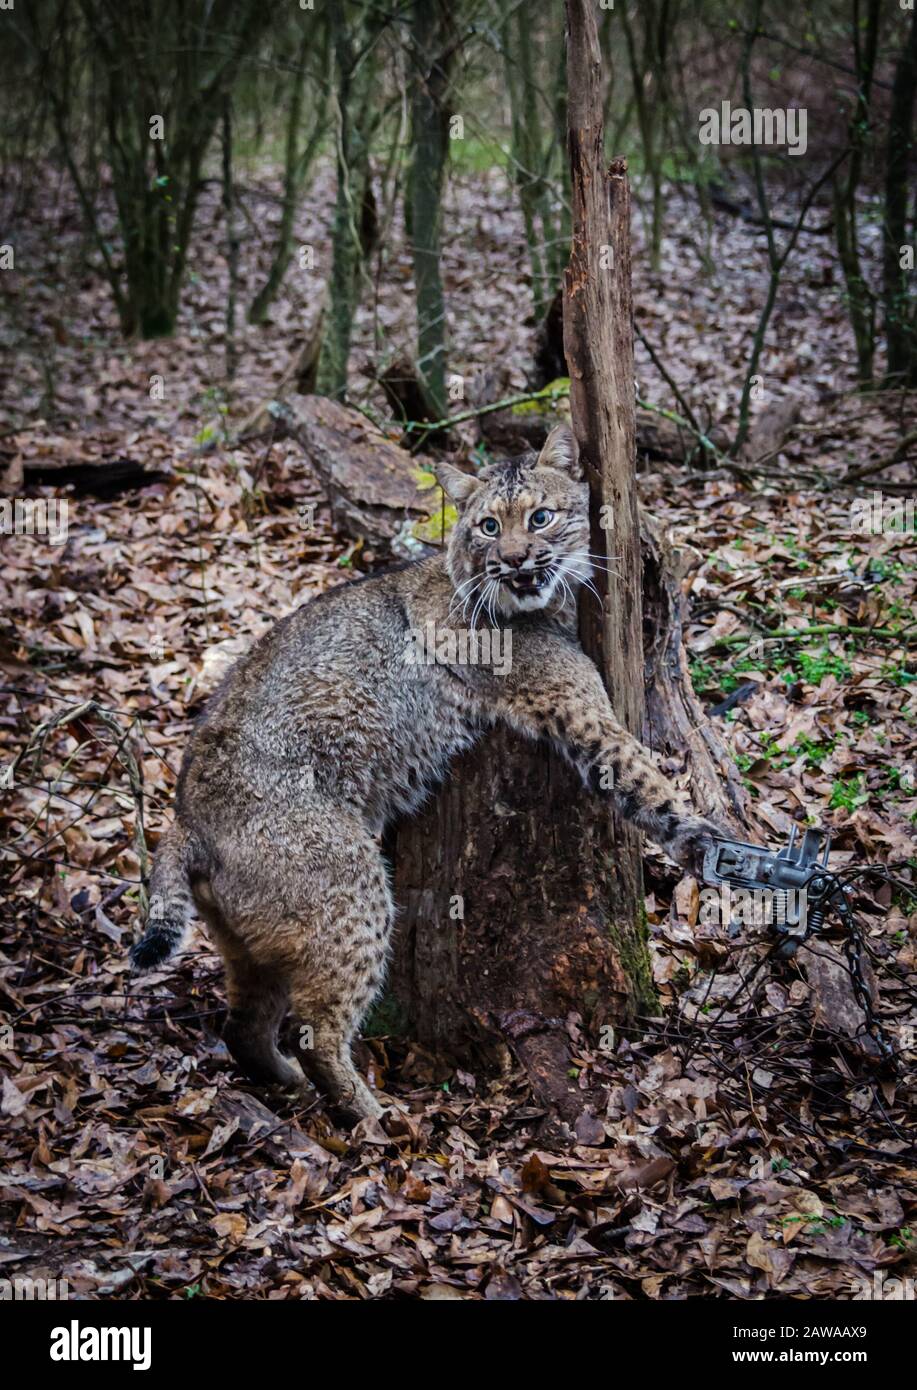 Bobcat feline caught by trapper in live trap.  Wildlife predator trapped in foothold trap. Management and recreational sport activity, animal trapping Stock Photo